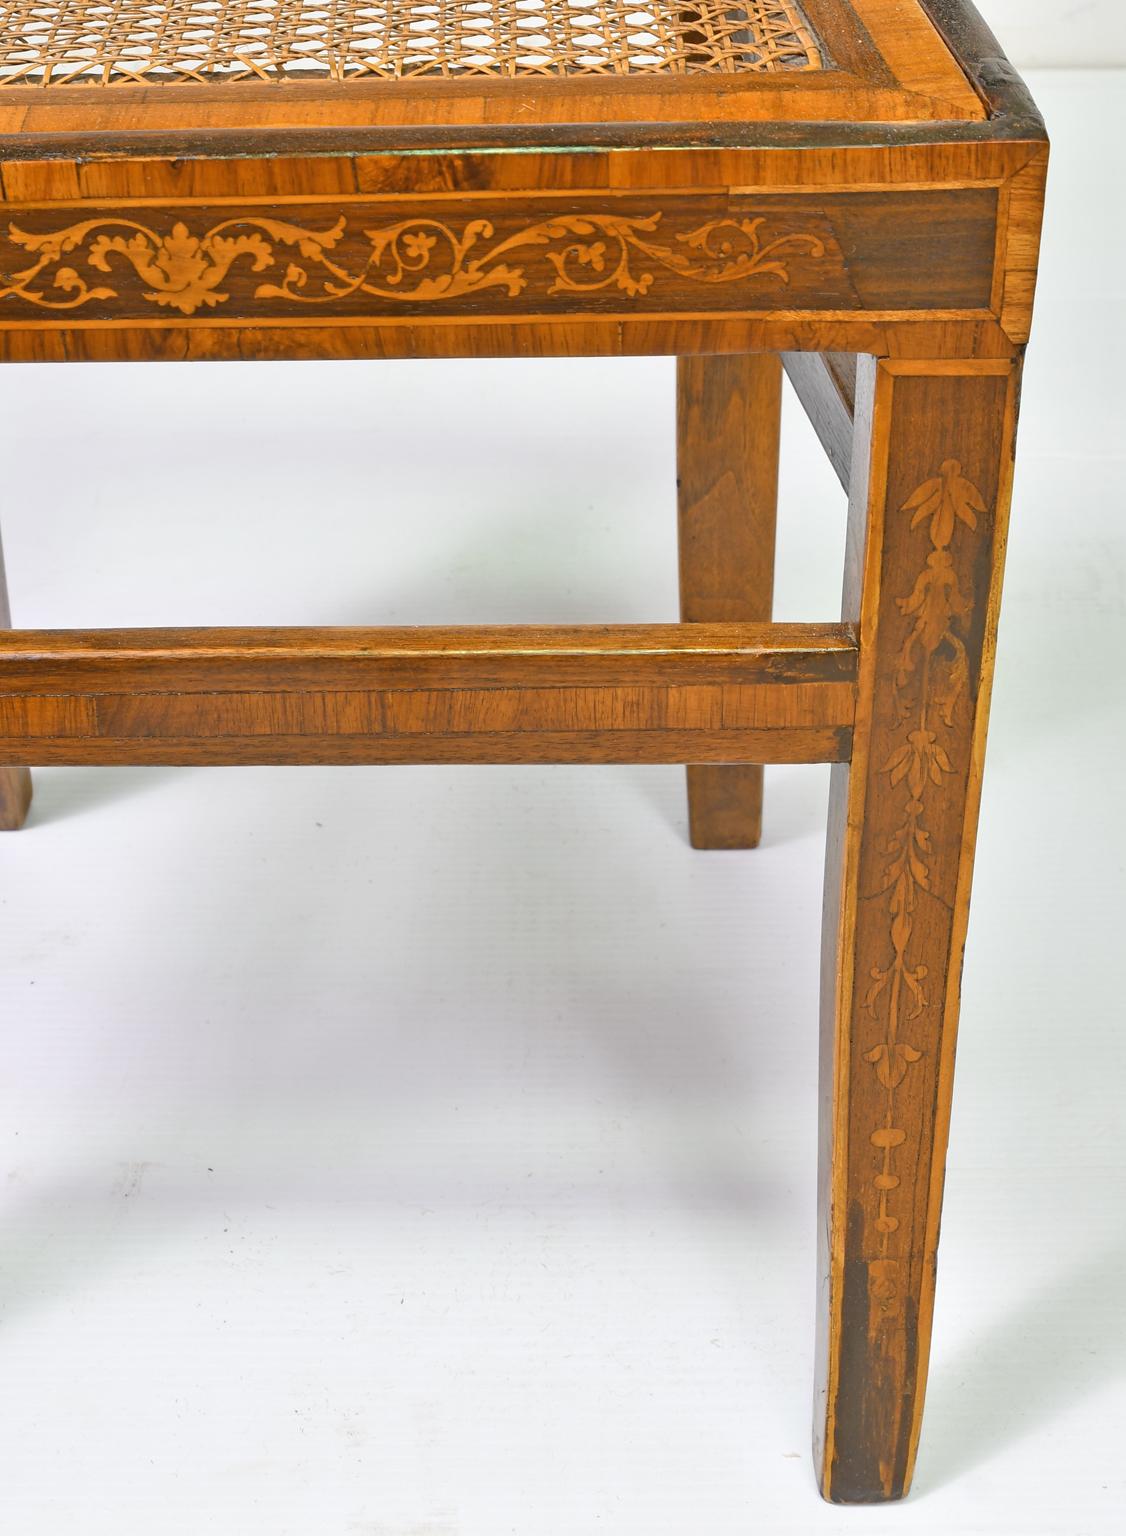 Pair of Antique English Regency Side Chairs with Marquetry Inlays & Caned Seat For Sale 8